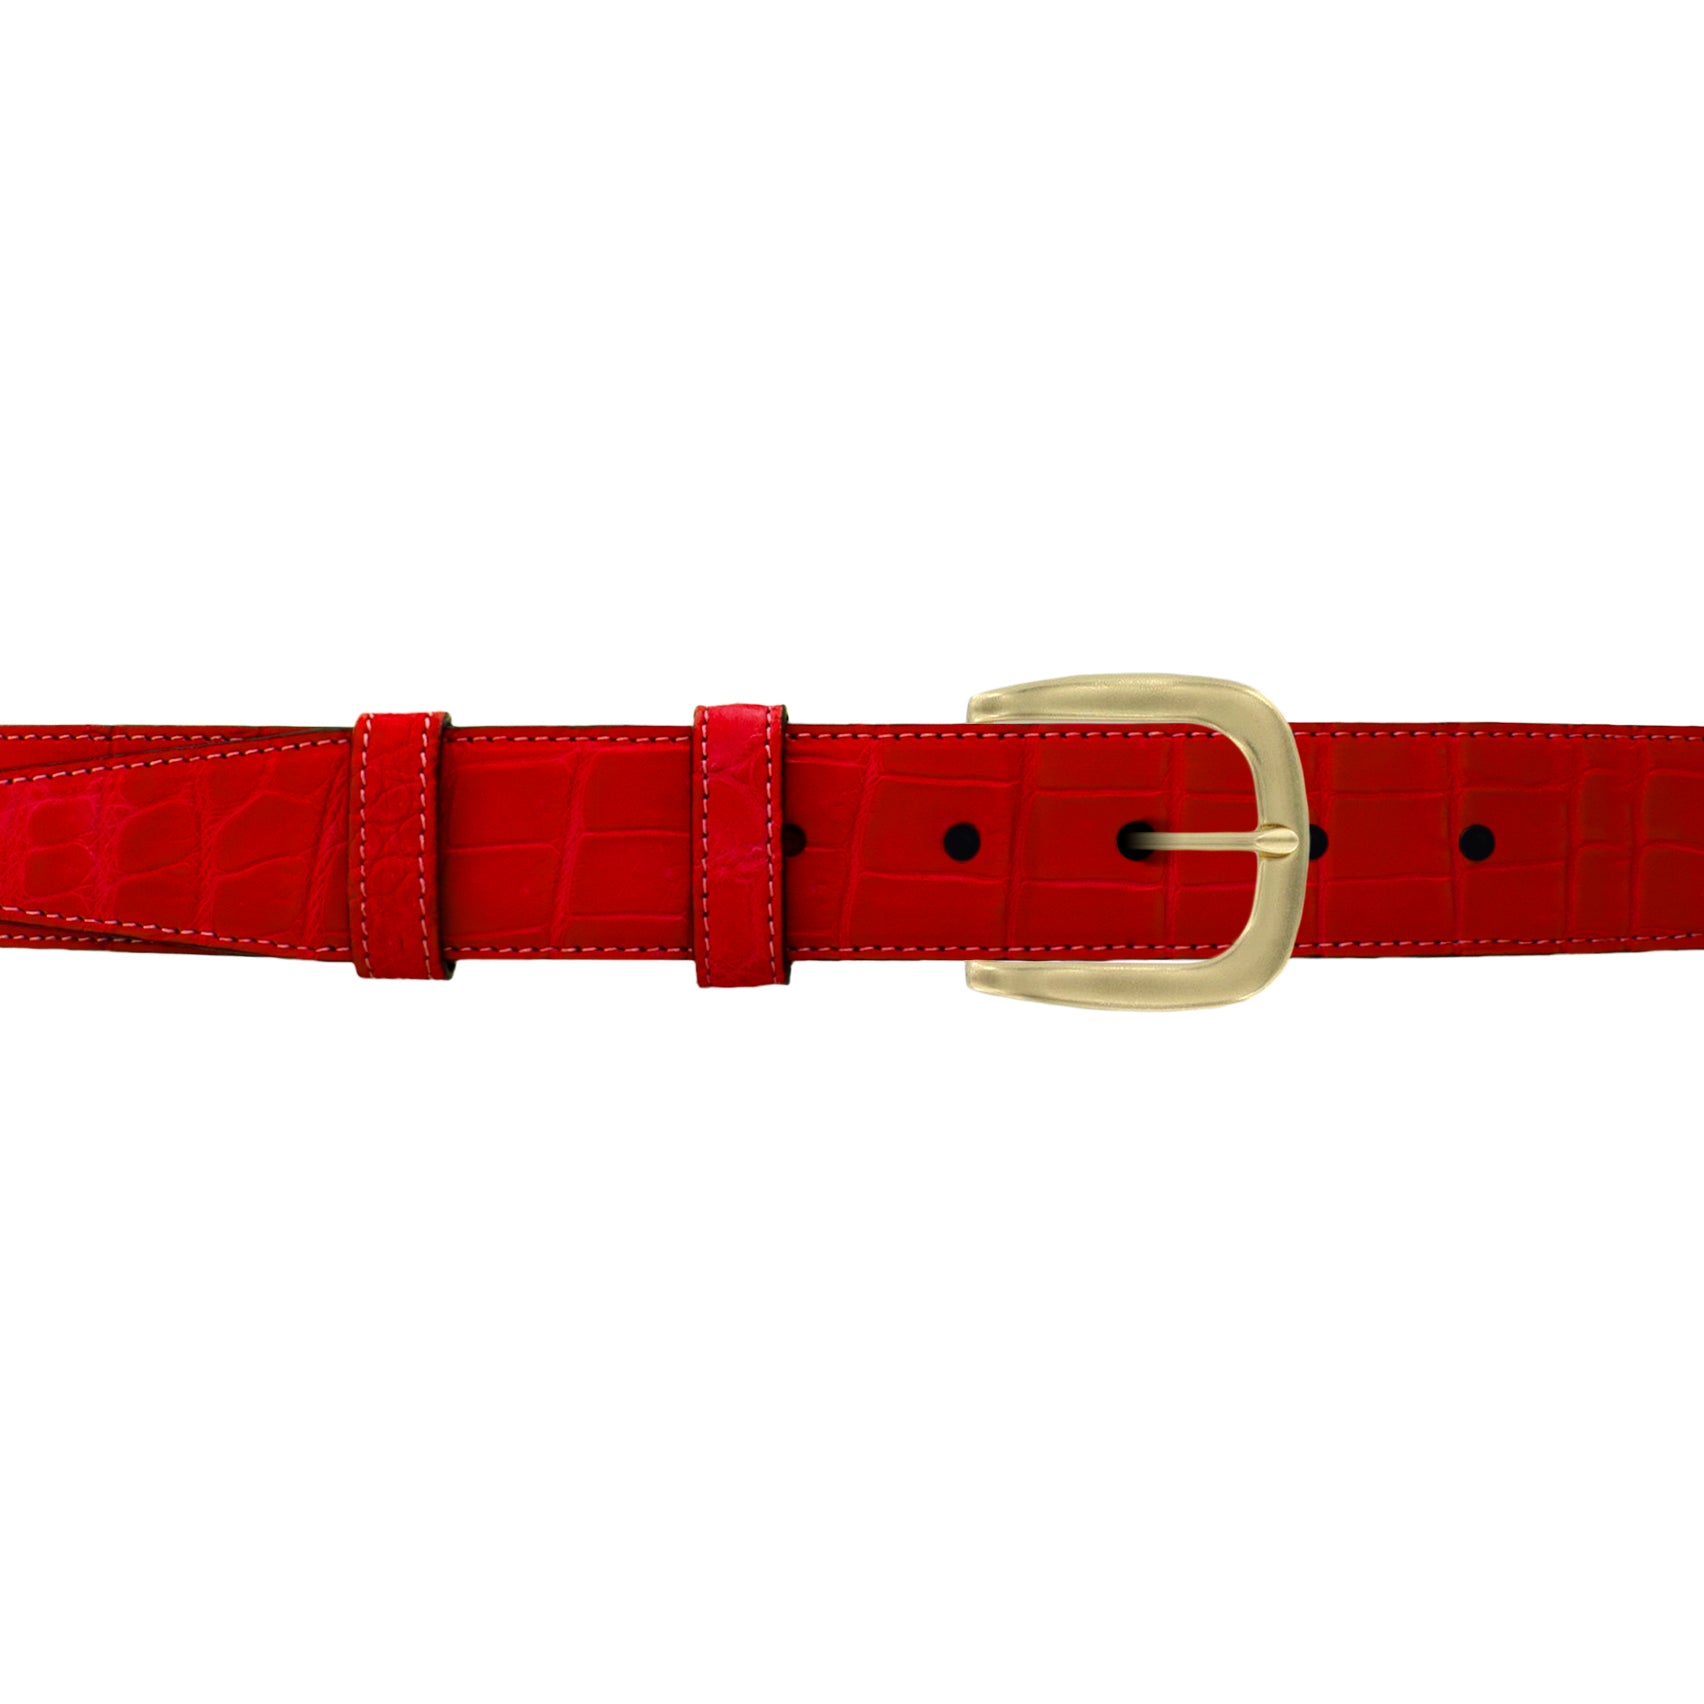 1 1/4" Candy Seasonal Belt with Oxford Cocktail Buckle in Brass